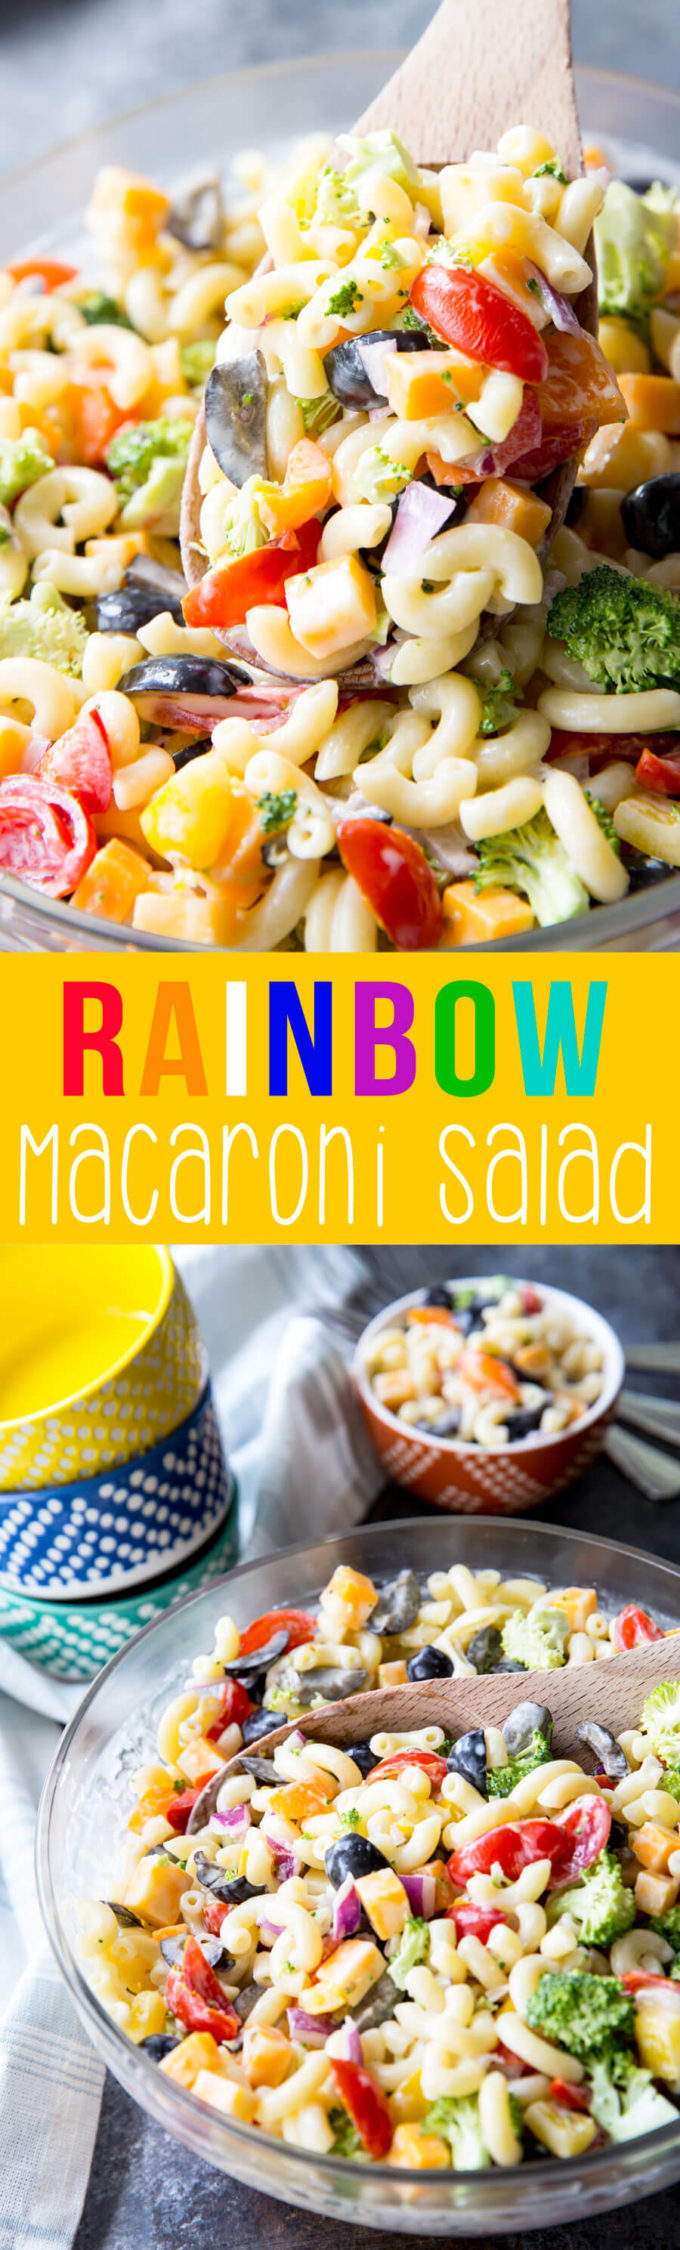 Rainbow Macaroni Salad: This pasta salad offers crunchy veggies, chunks of cheese, olives, and is dressed in a light, slightly tangy, slightly sweet dressing. The perfect summer side salad. 